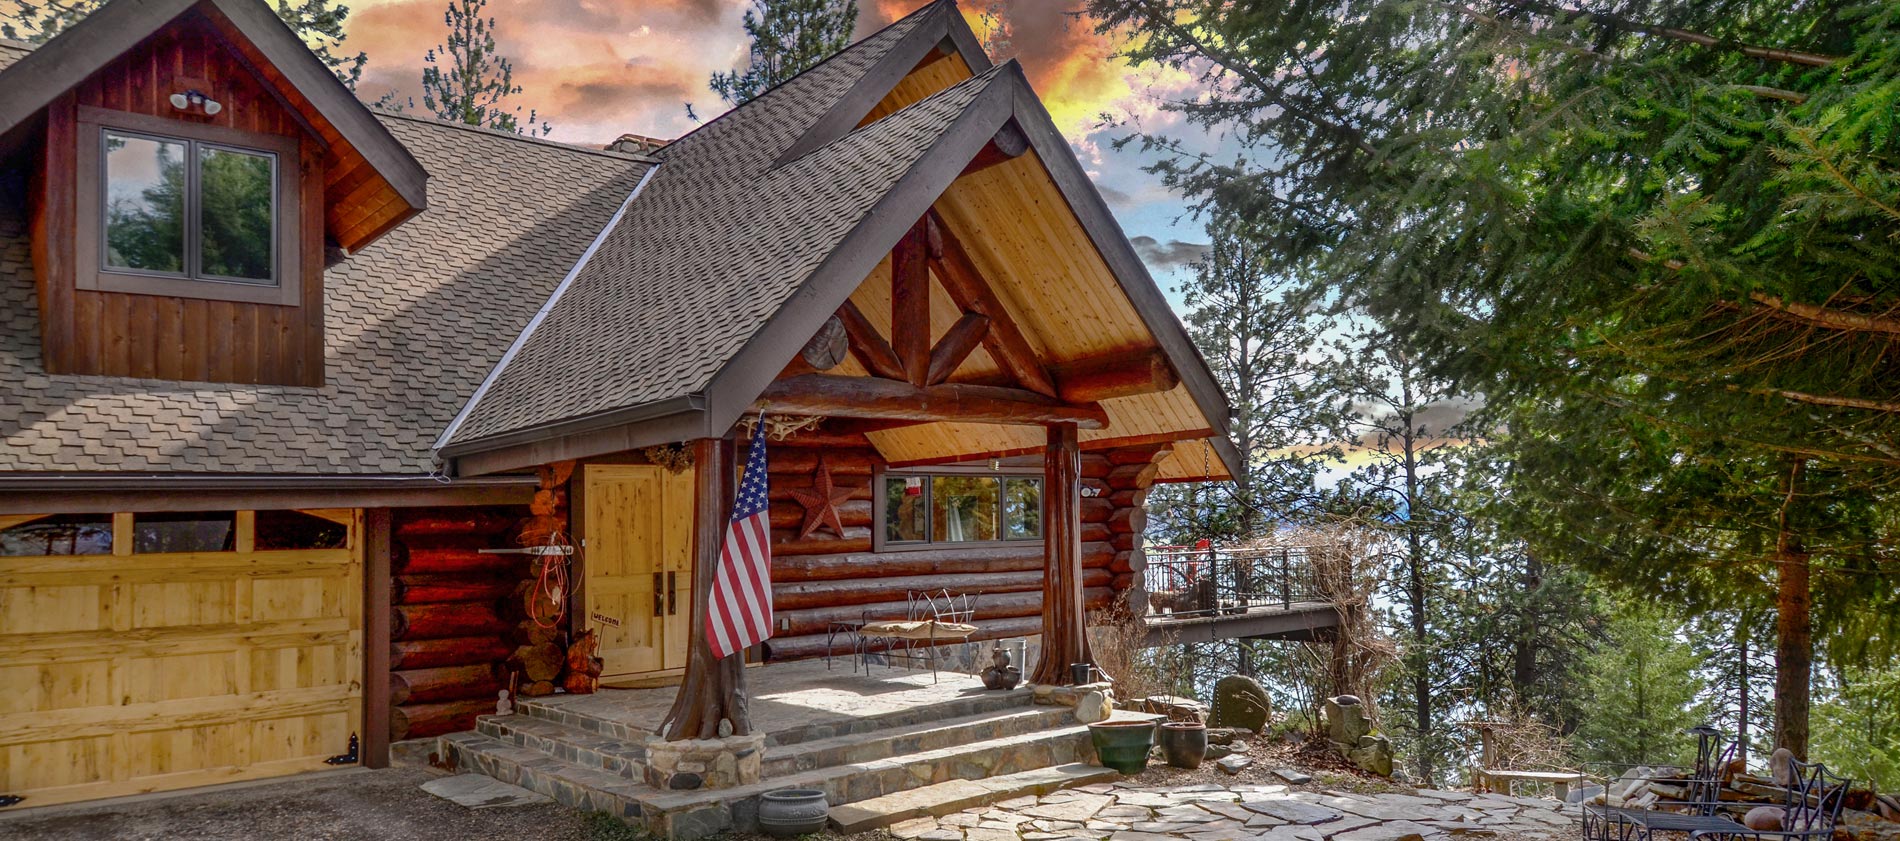 Luxury Caribou Creek Log Home with views of Lake Pend Oreille